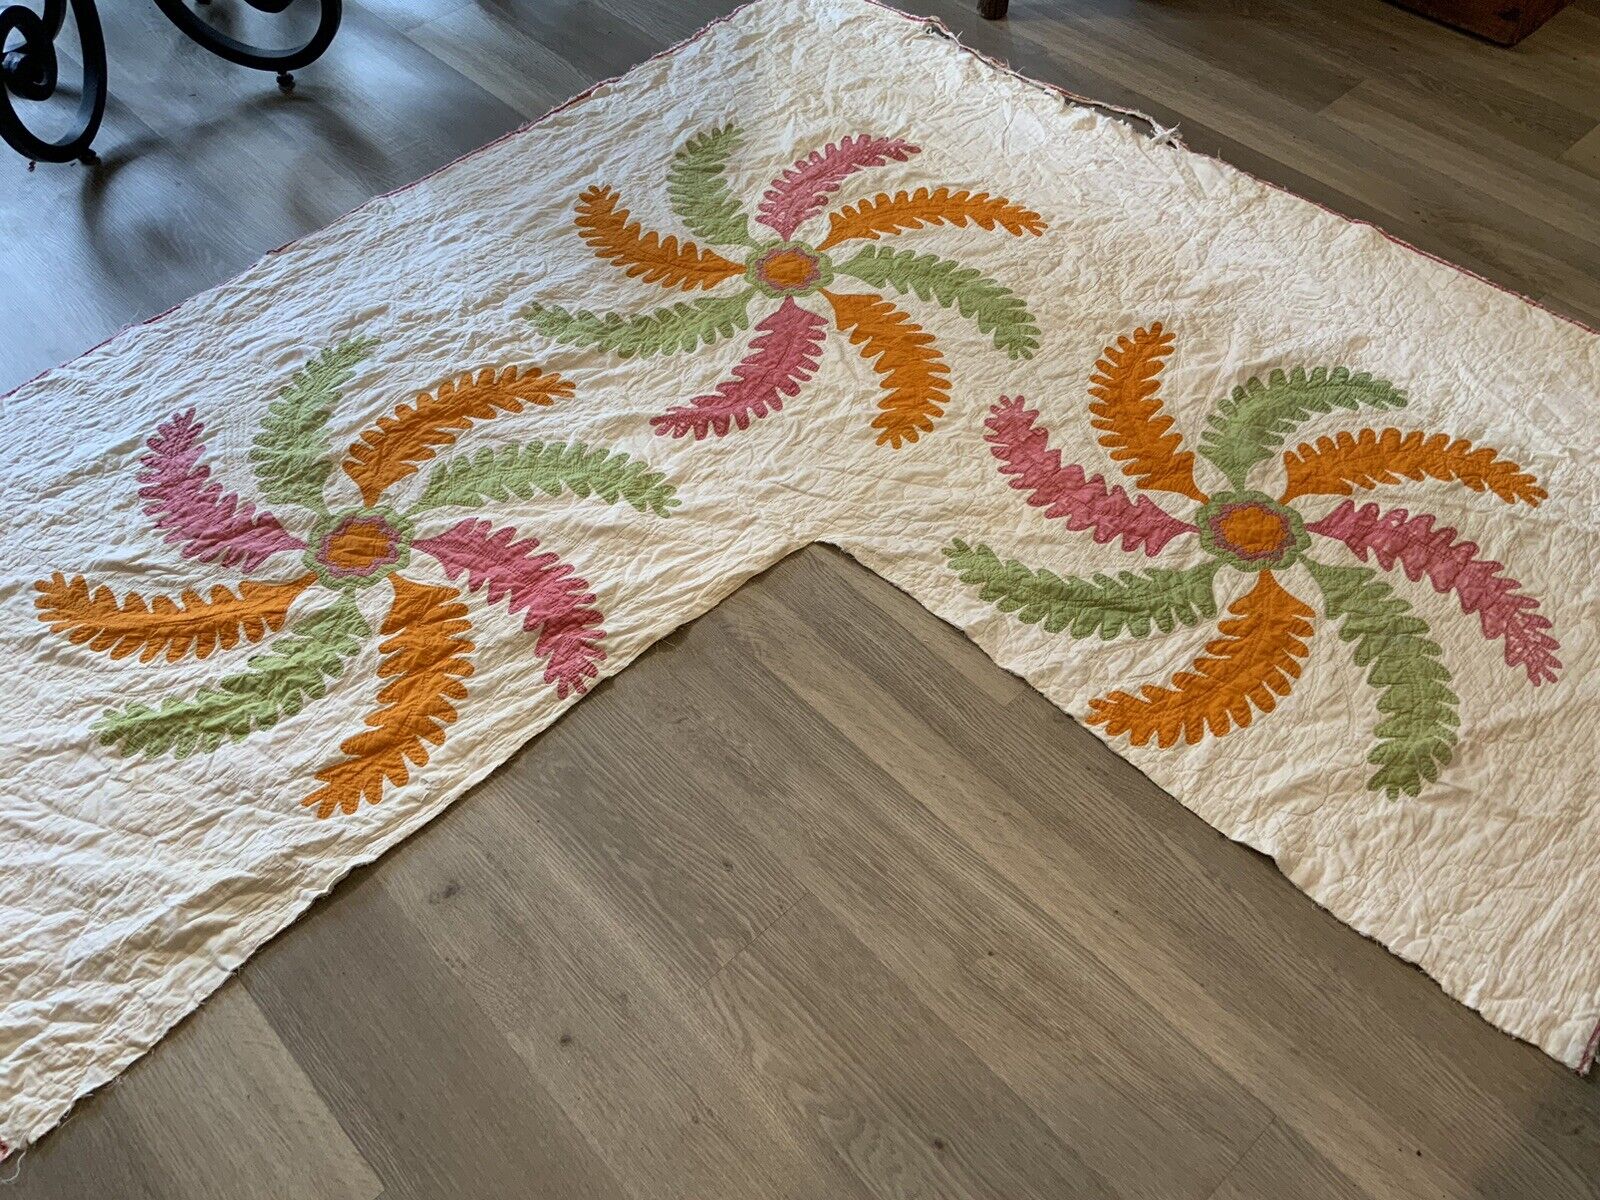 Antique Appliqué Flower & Leaf Quilt, 1880’s, Red, Cheddar, Green, Cutter, As Is